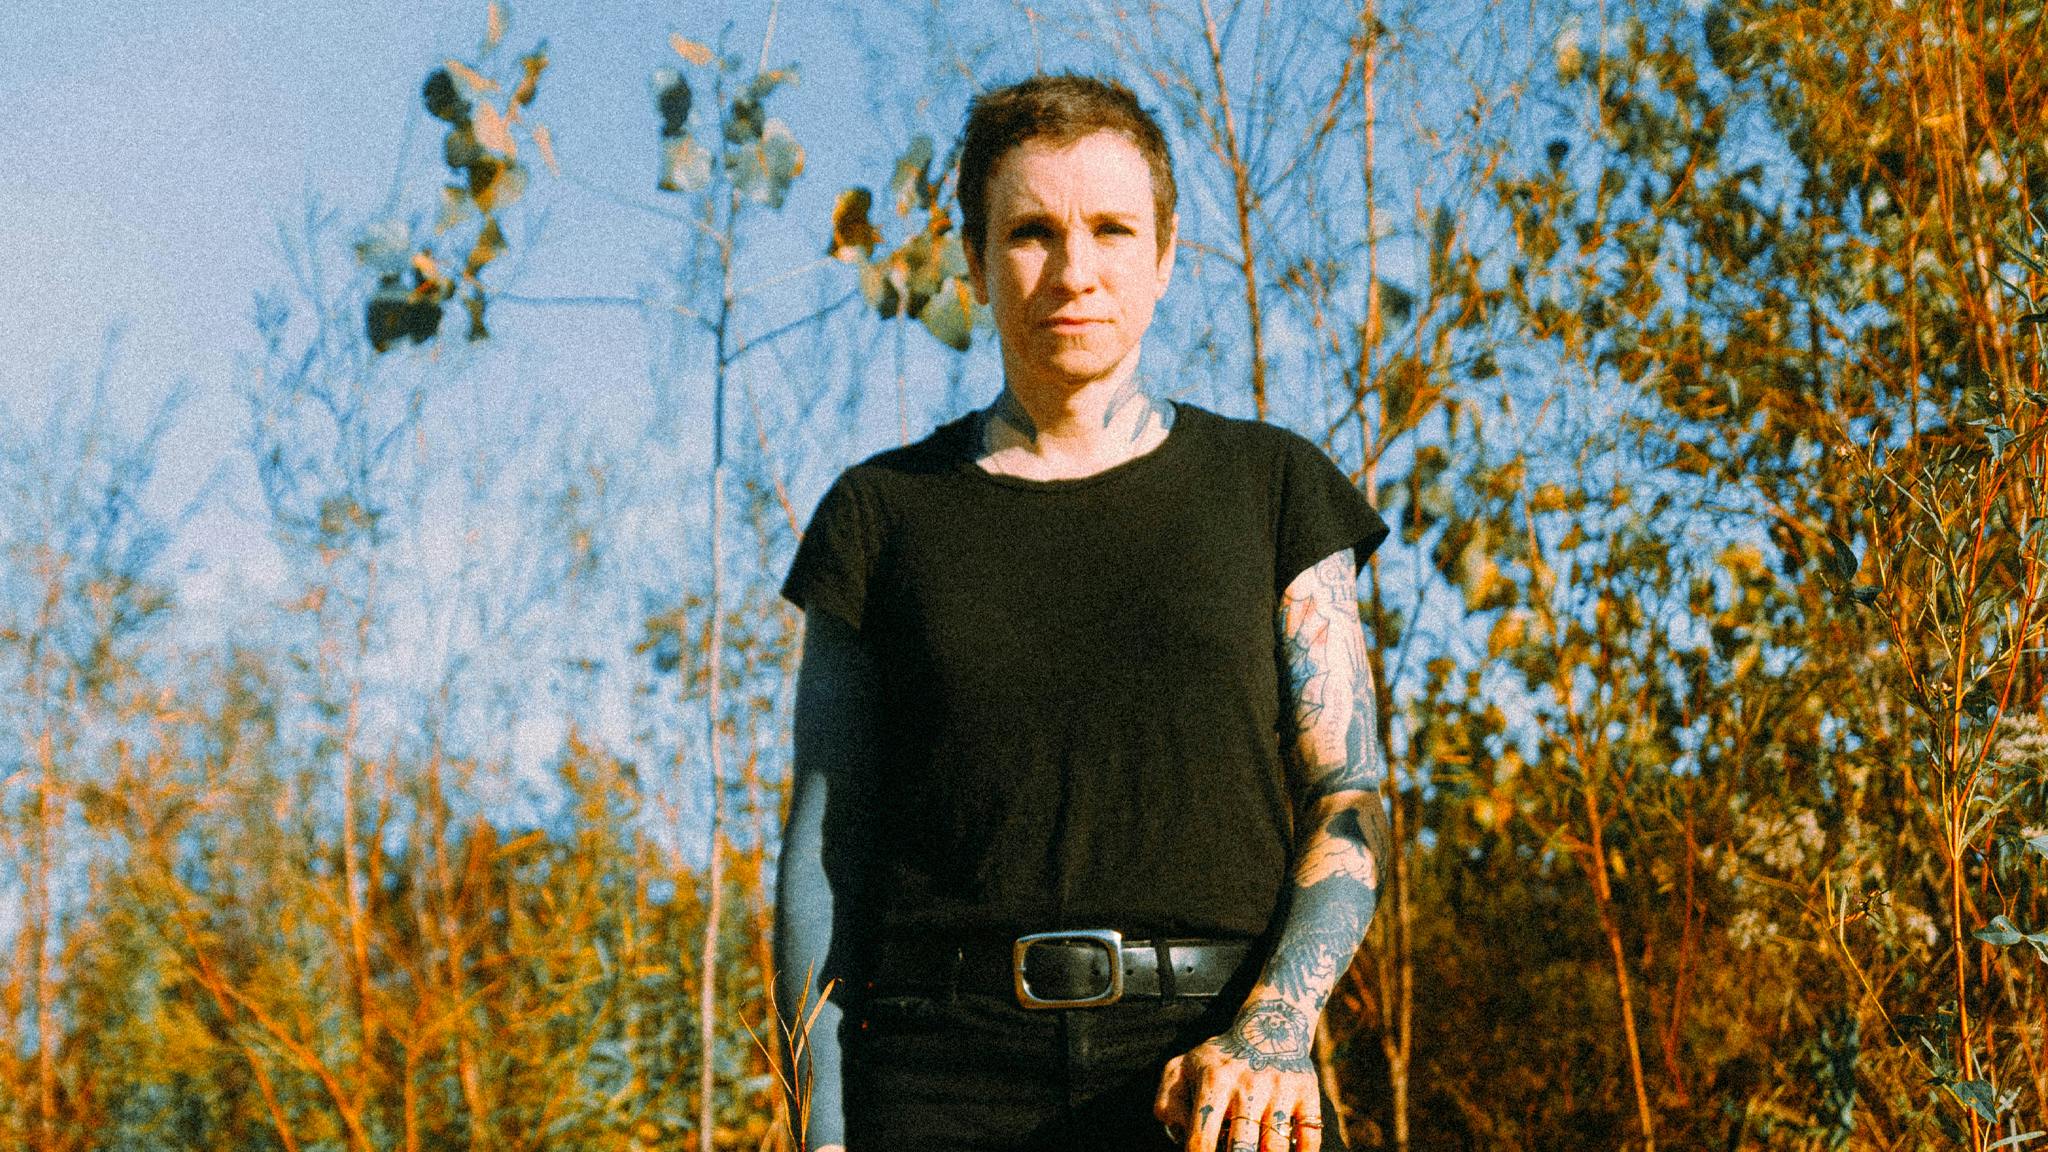 Laura Jane Grace: “Sometimes punk is sh*tty, because there are sh*tty punks. But at its best, punk is rad people doing radical things”